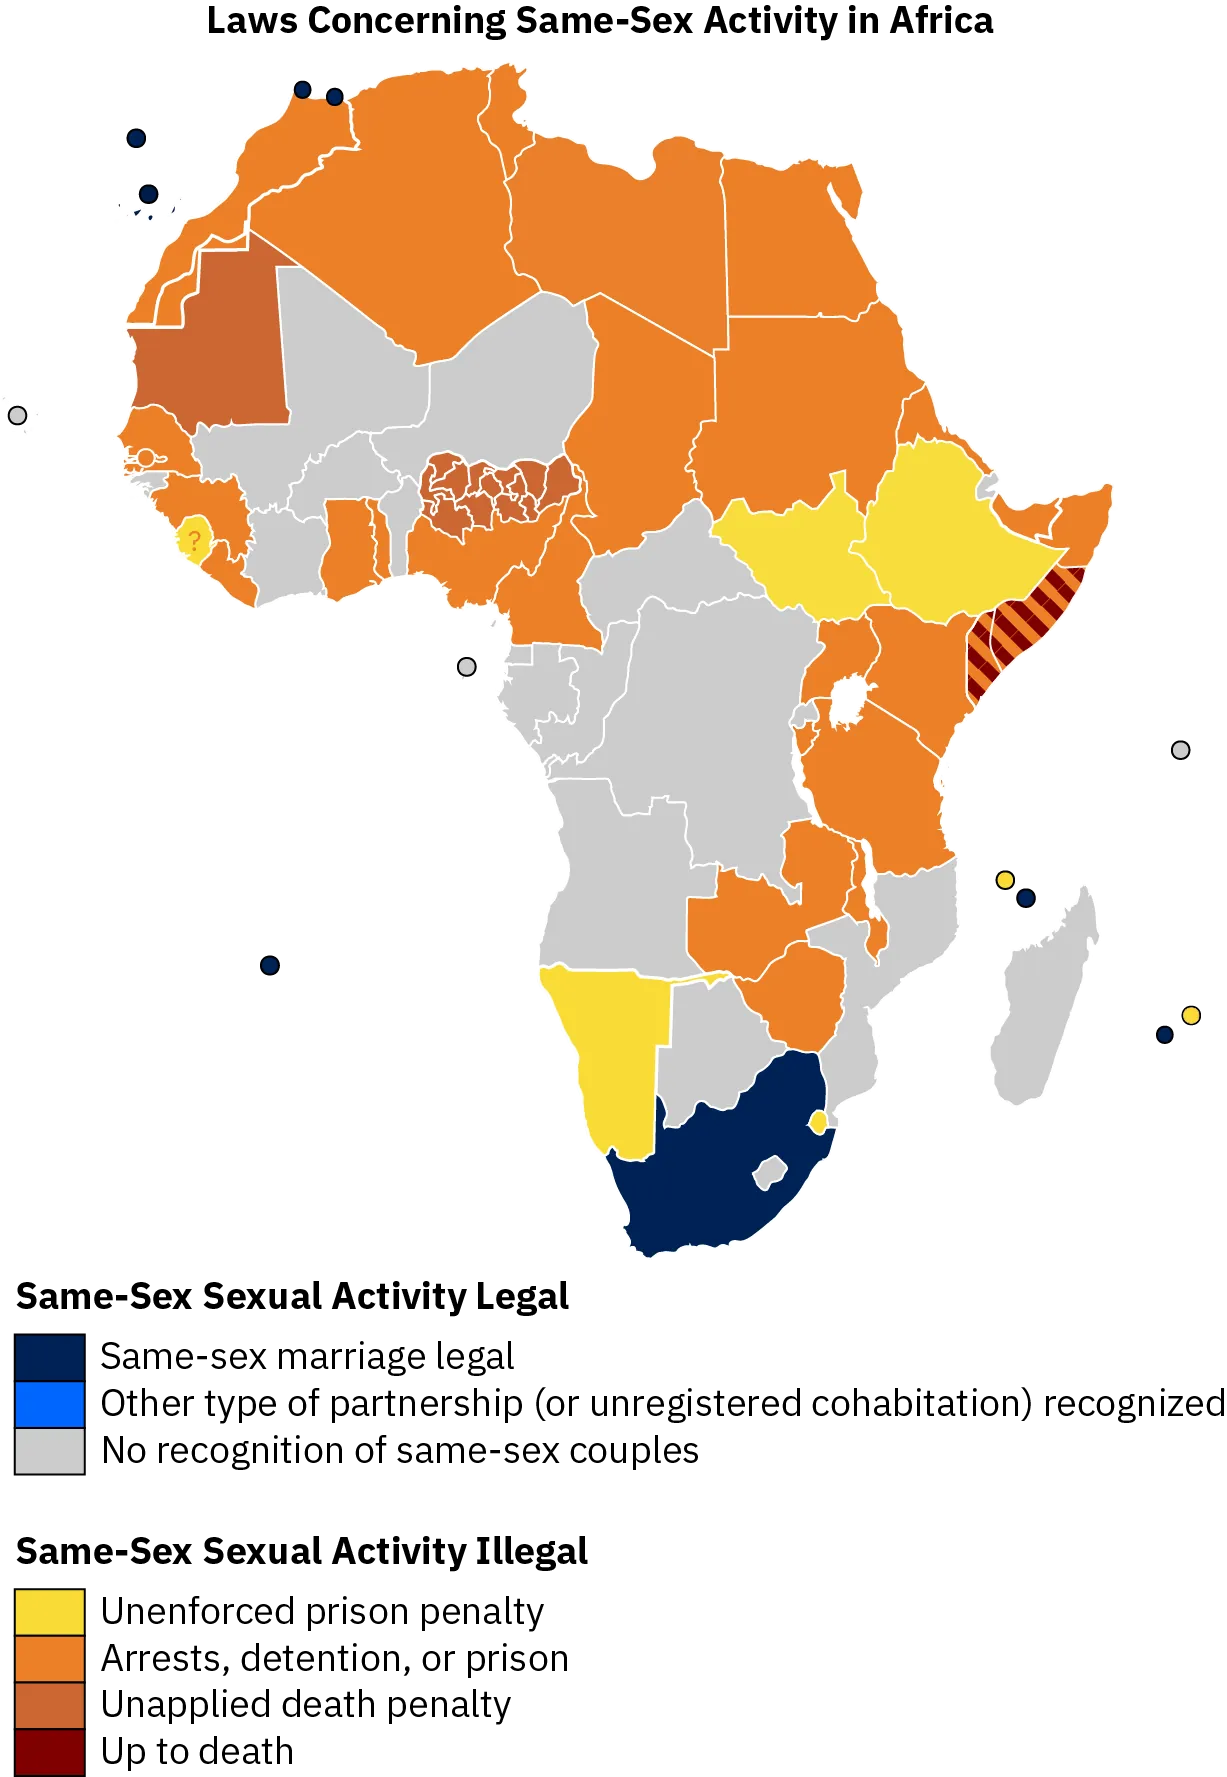 A map of Africa shows the different laws concerning same-sex activities in different African countries.  Most countries fall into the following categories: no recognition of same sex couples; unenforced prison penalties; arrest, detention, or prison; or unapplied death penalty. In a few countries in Africa, same-sex marriage is legal or another type of partnership or unregistered cohabitation is recognized. Only one country applies the death penalty for same-sex relations.